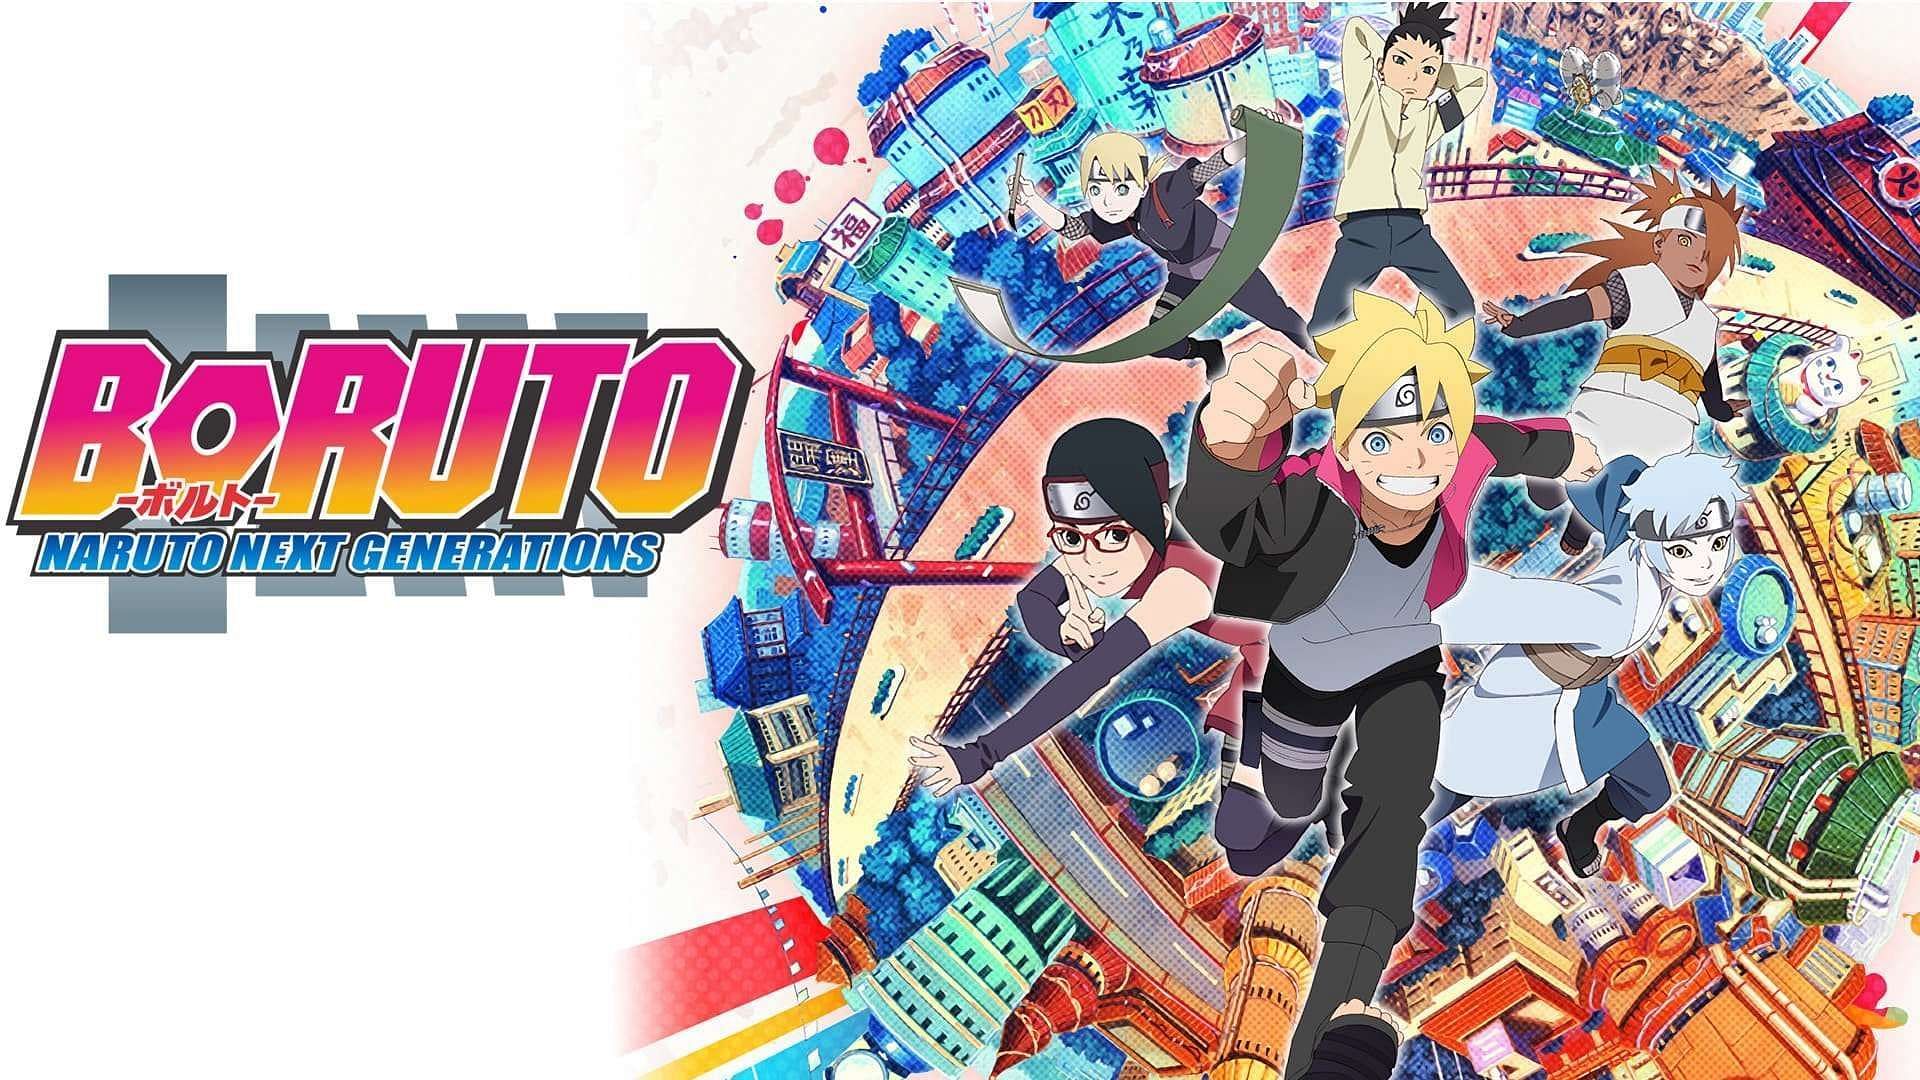 The Boruto &amp; Naruto Jump Festa 2023 Super Stage is likely to have major announcements for both series (Image via Studio Pierrot)